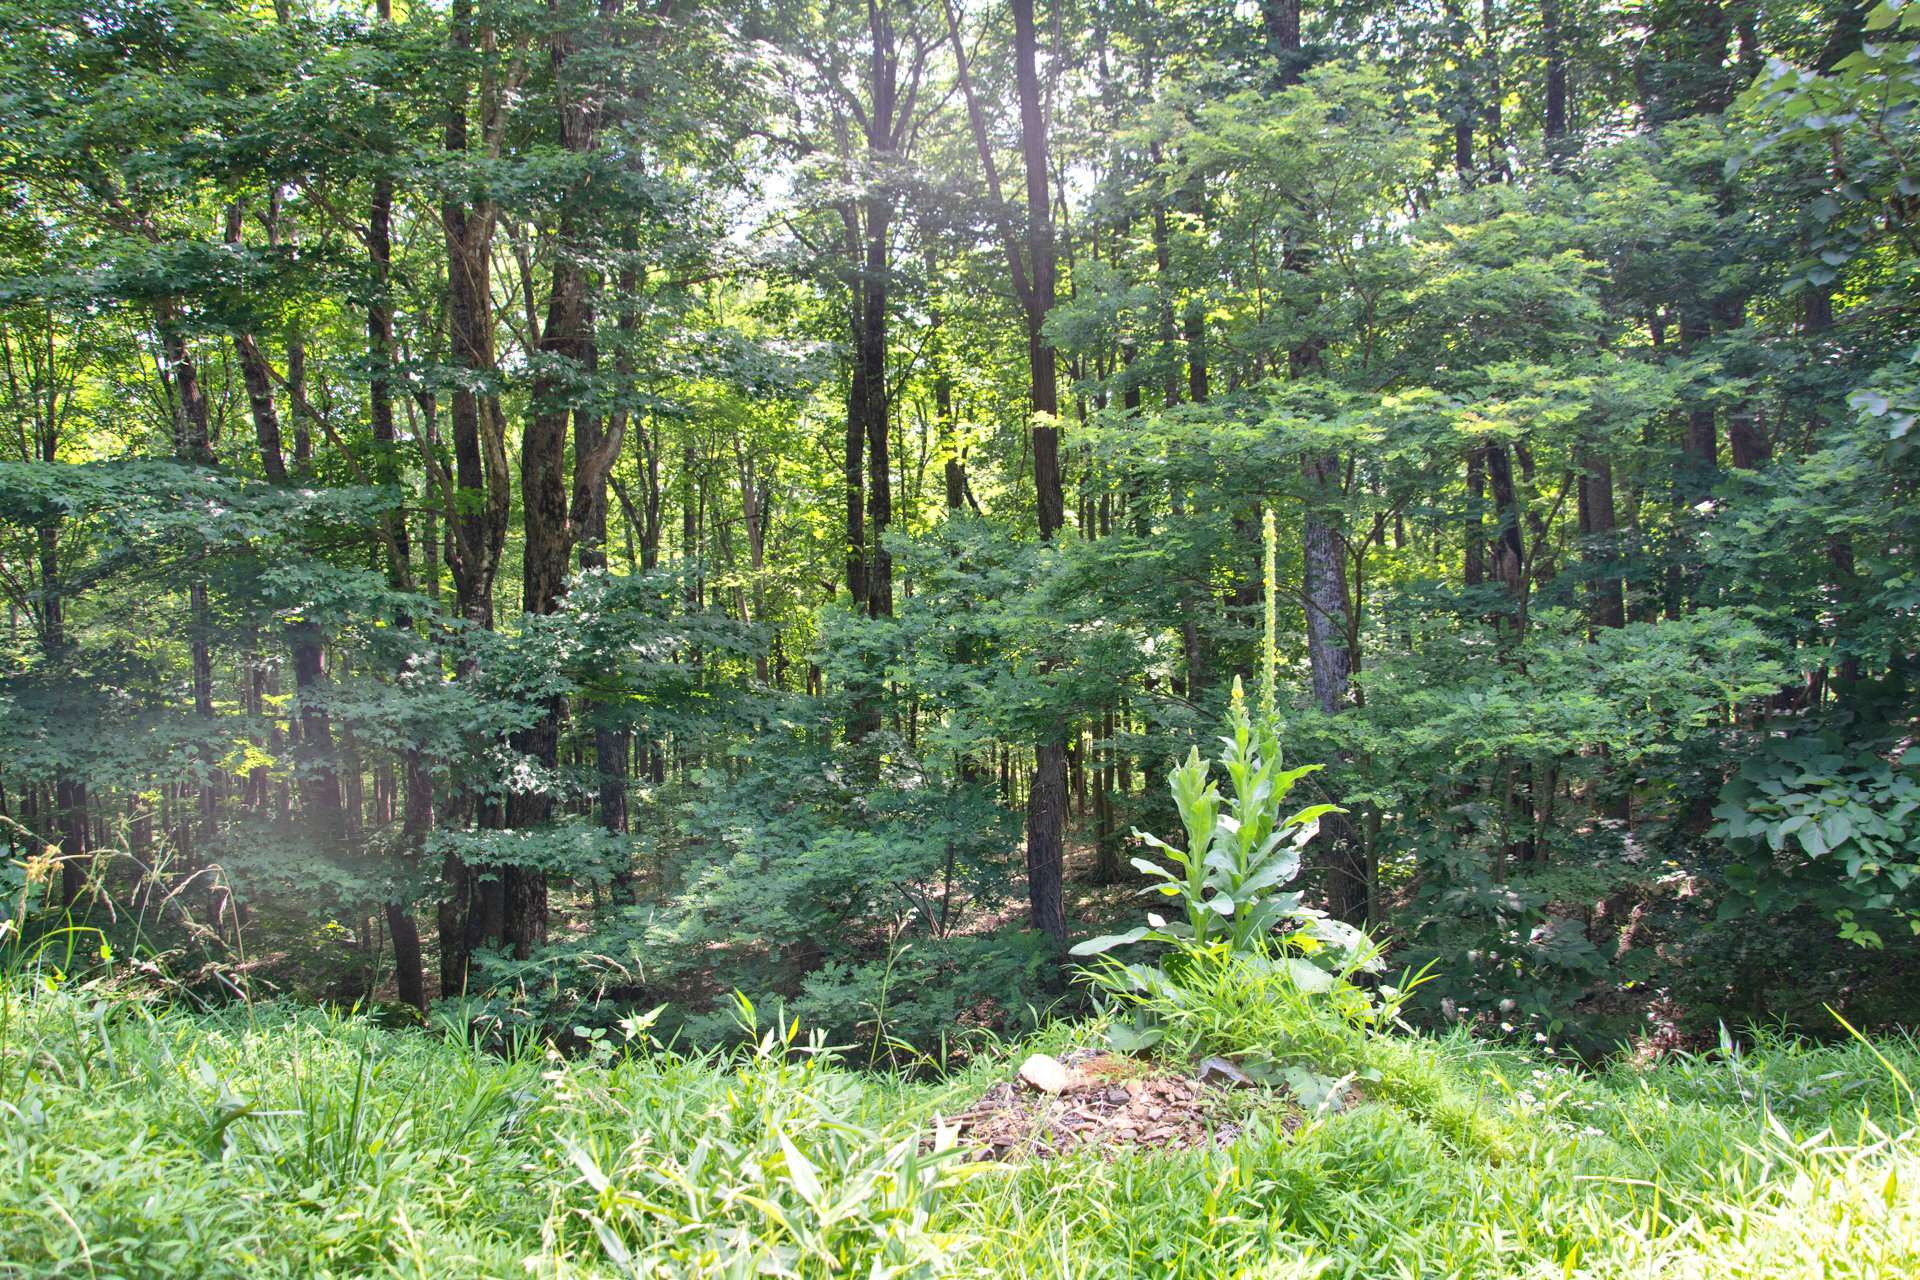 Lot 42 is a 2.70 acre home site with hardwoods and mountain foliage, and shared well rights.  This mountain home site is offered at $50,000.